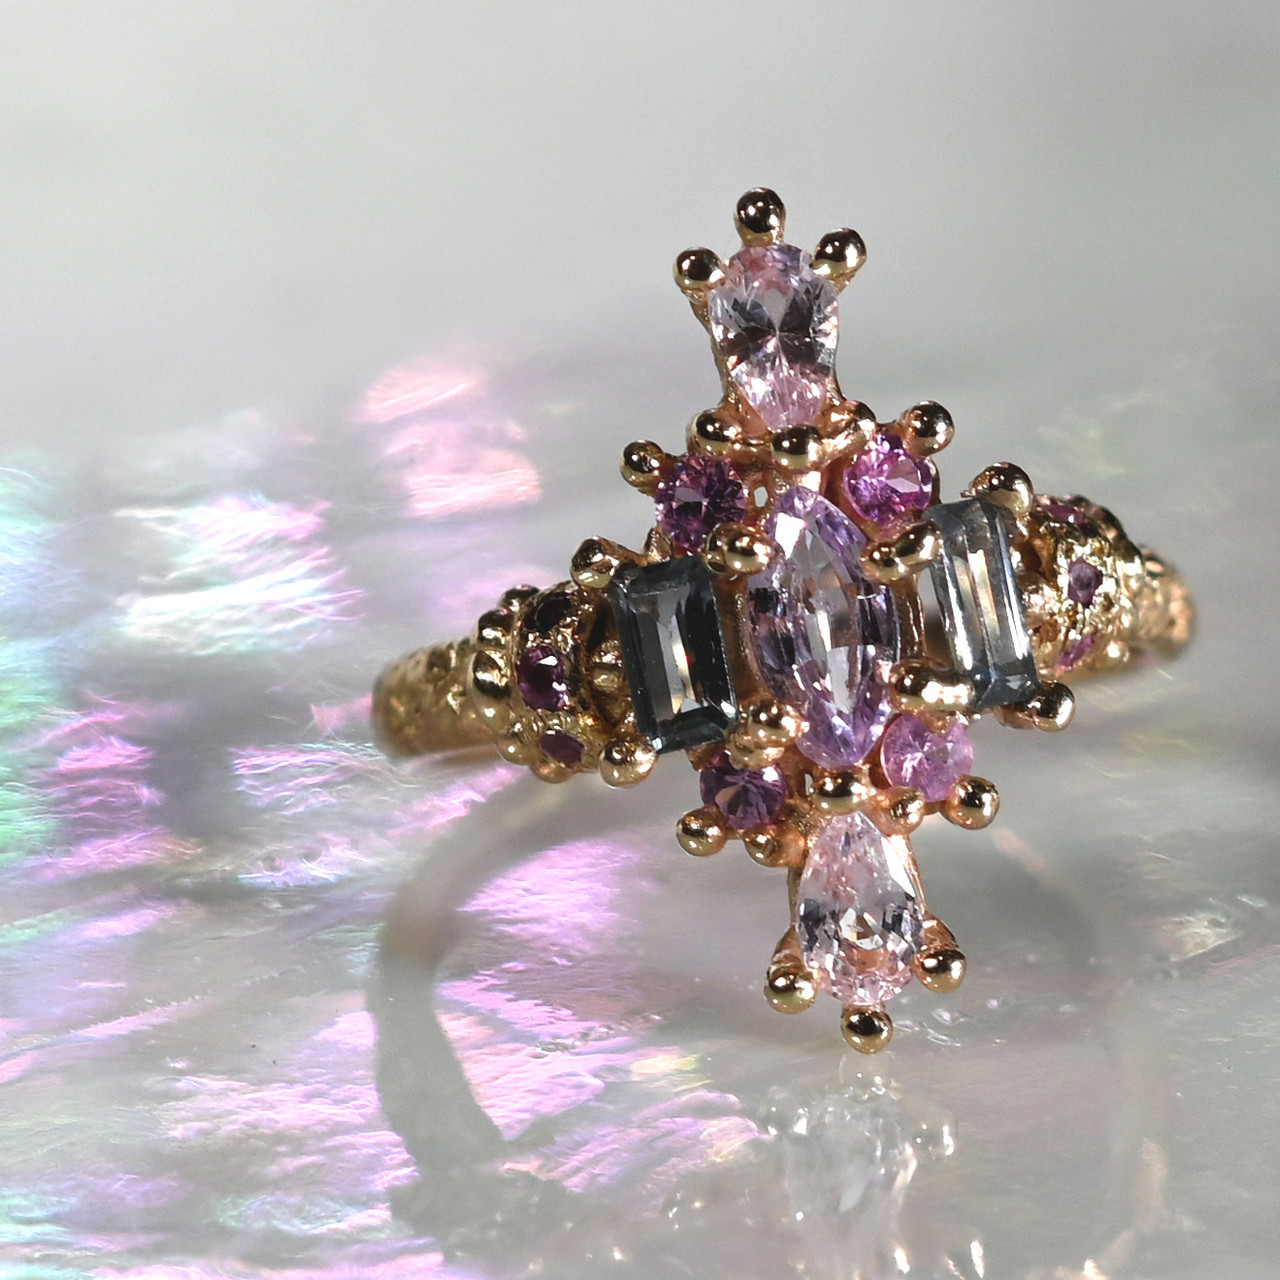 Lilac Kaleidoscope Art Ring by Ciara Bowles available at tomfoolery London as a part of Art Ring 2023 exhibition.